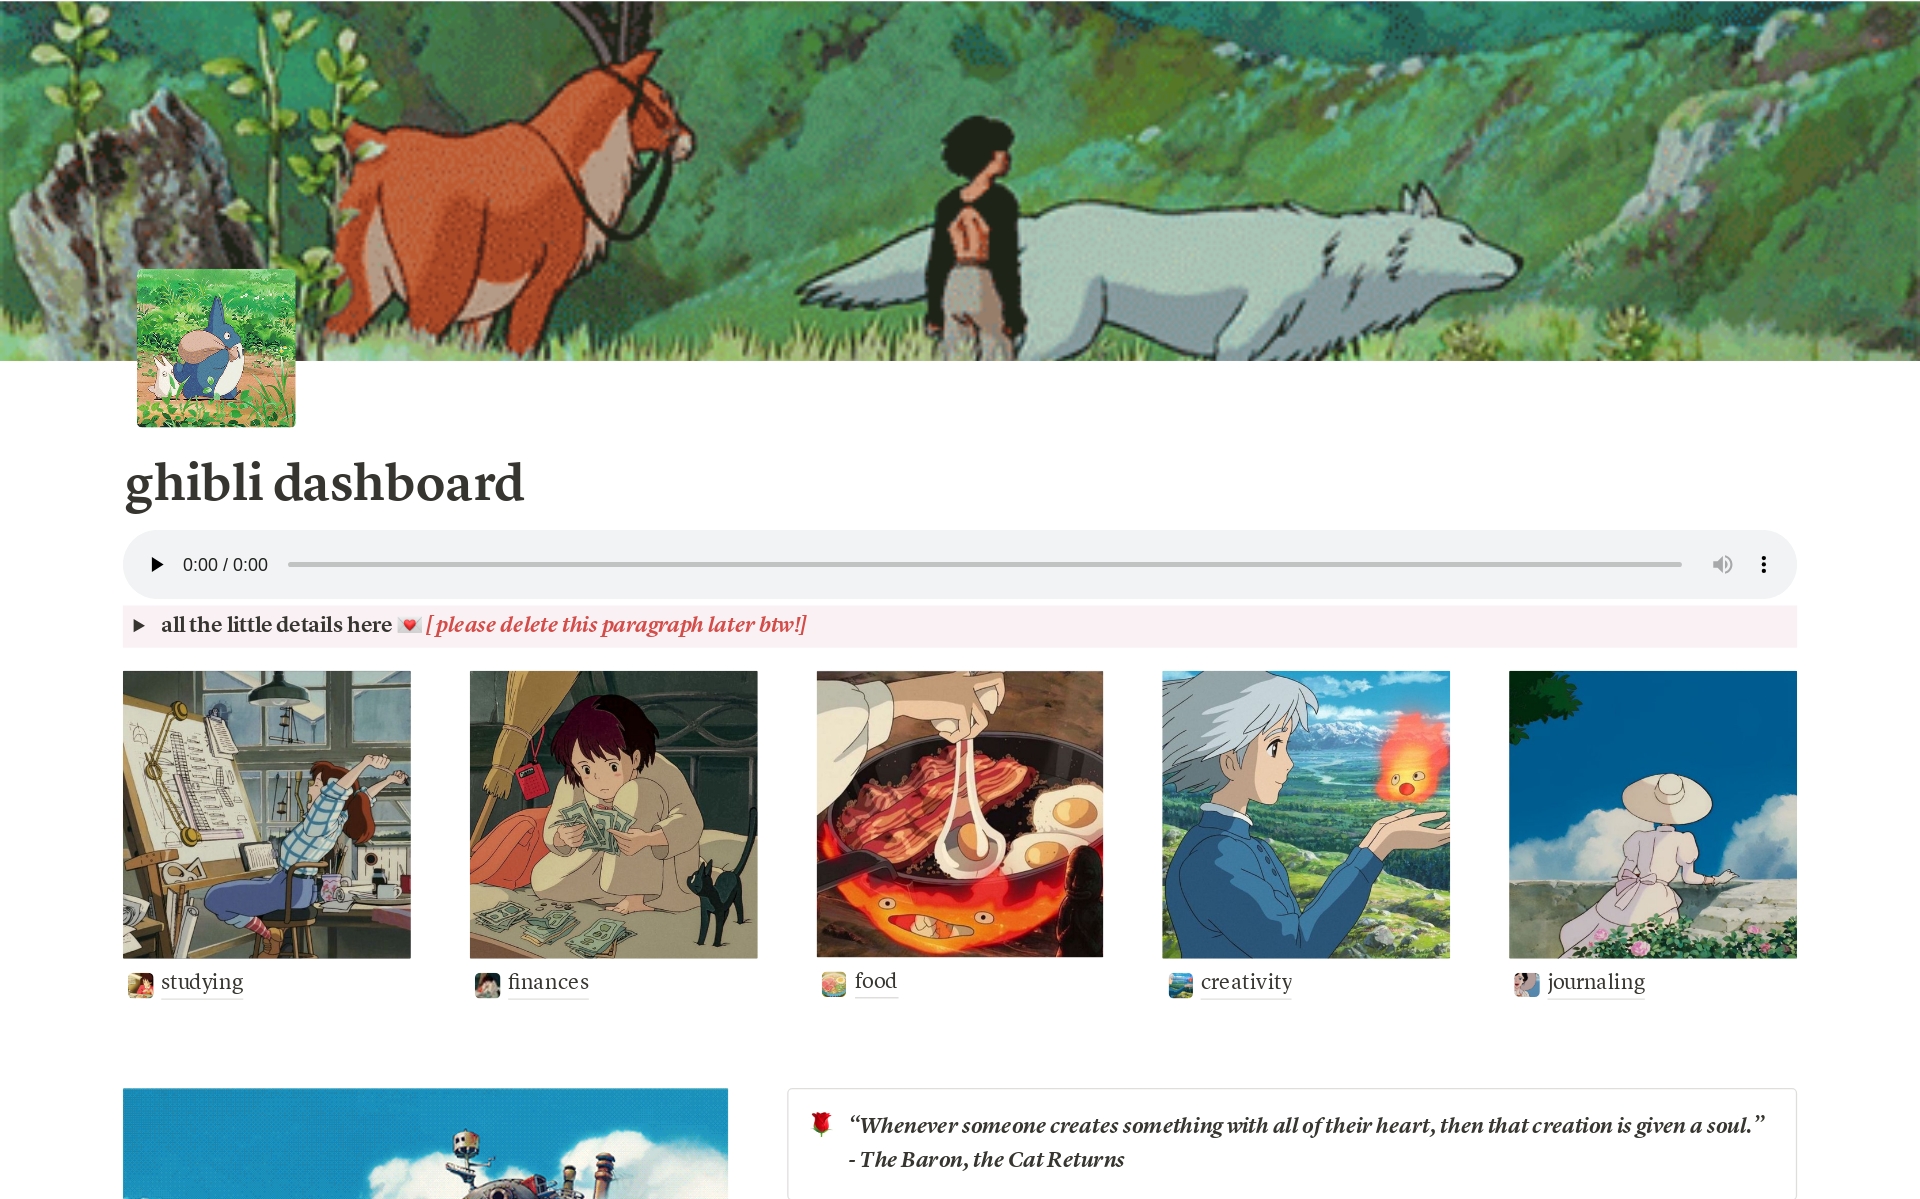 Studio Ghibli Aesthetic Dashboard | Notion template containing study planner, finance tracker, food recipe pages, journaling and creativity pages! 